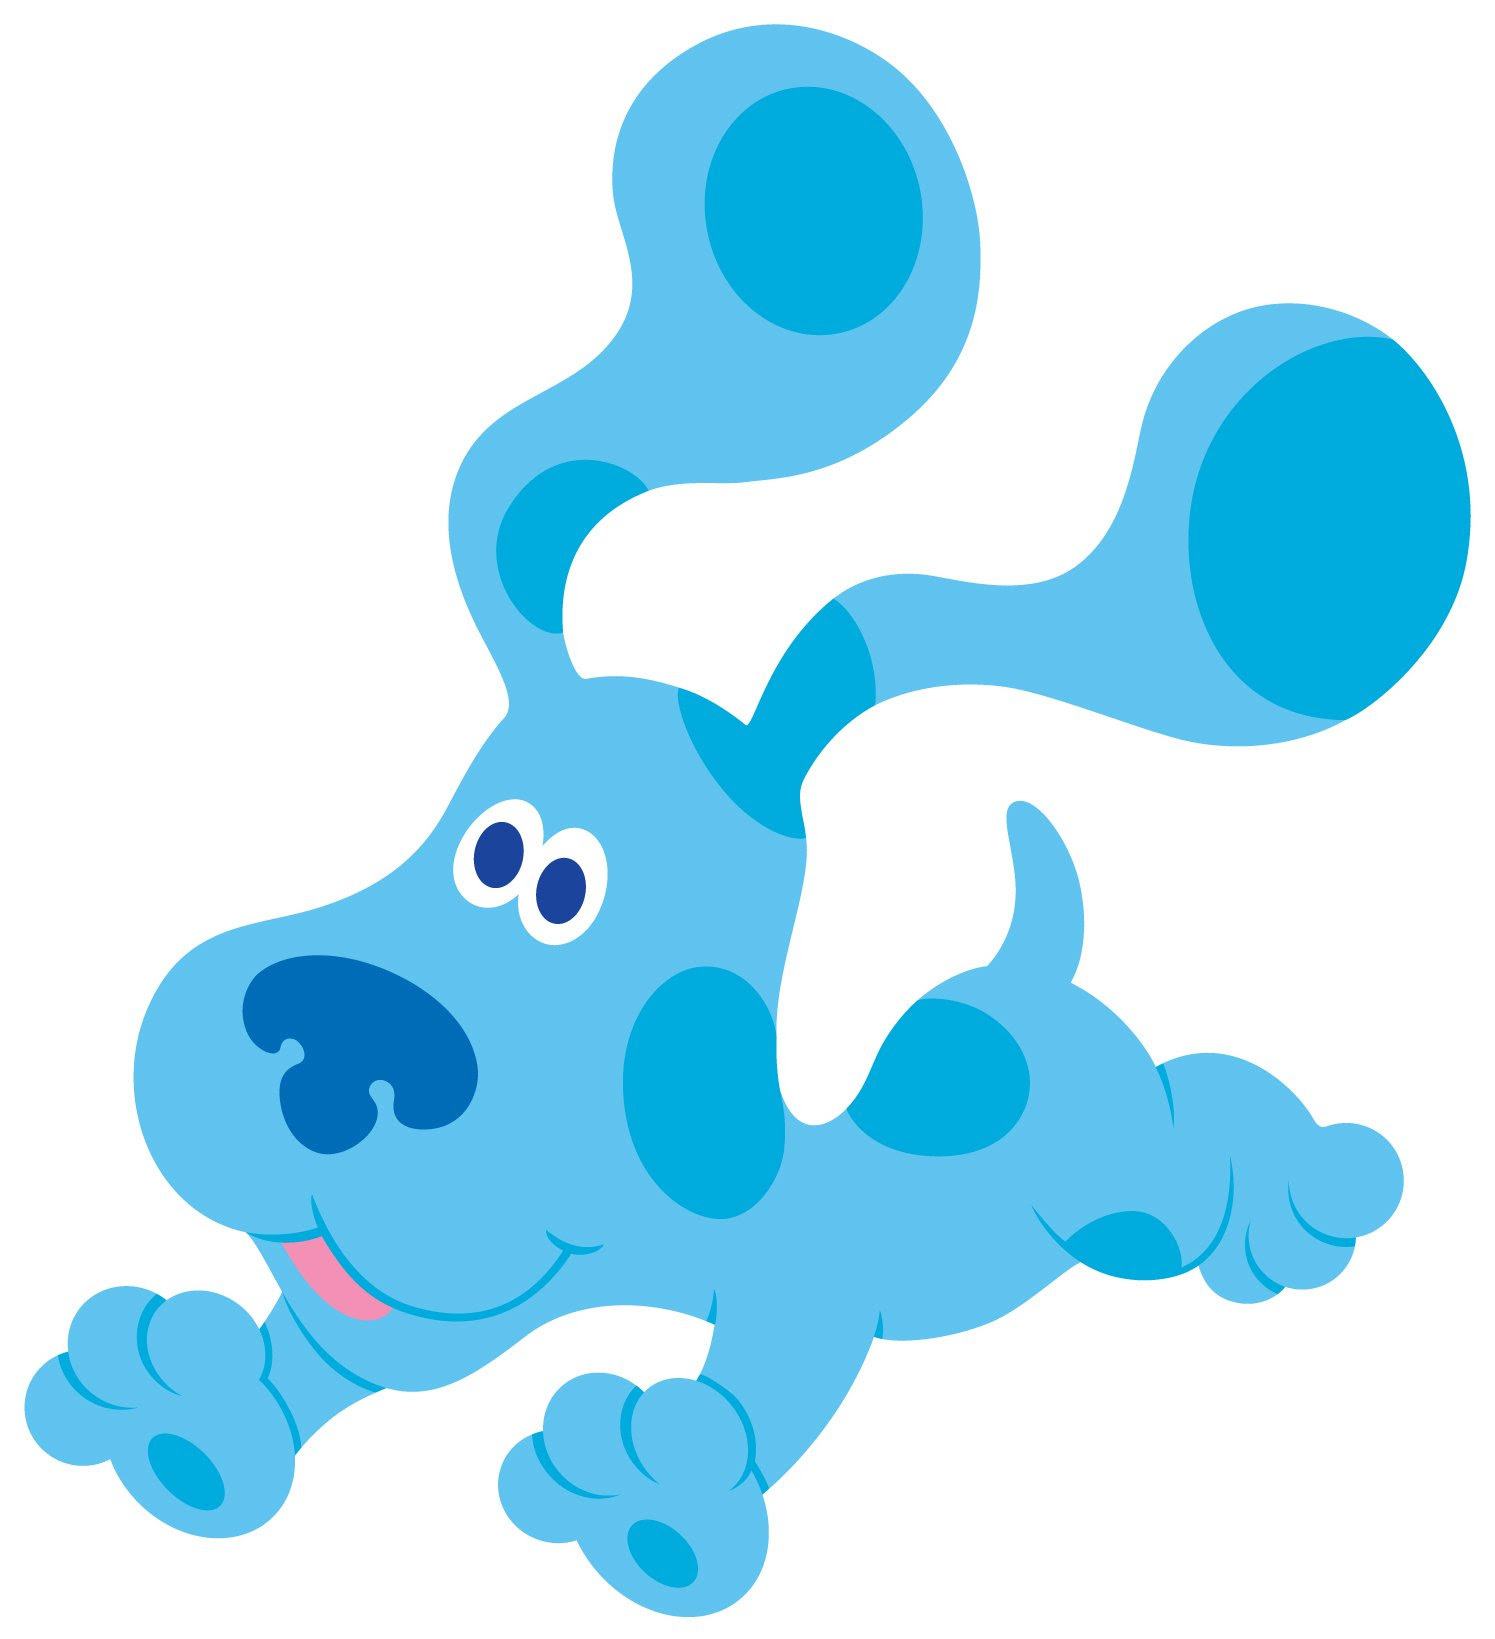 images-of-blue-clues-oh-my-fiesta-in-english